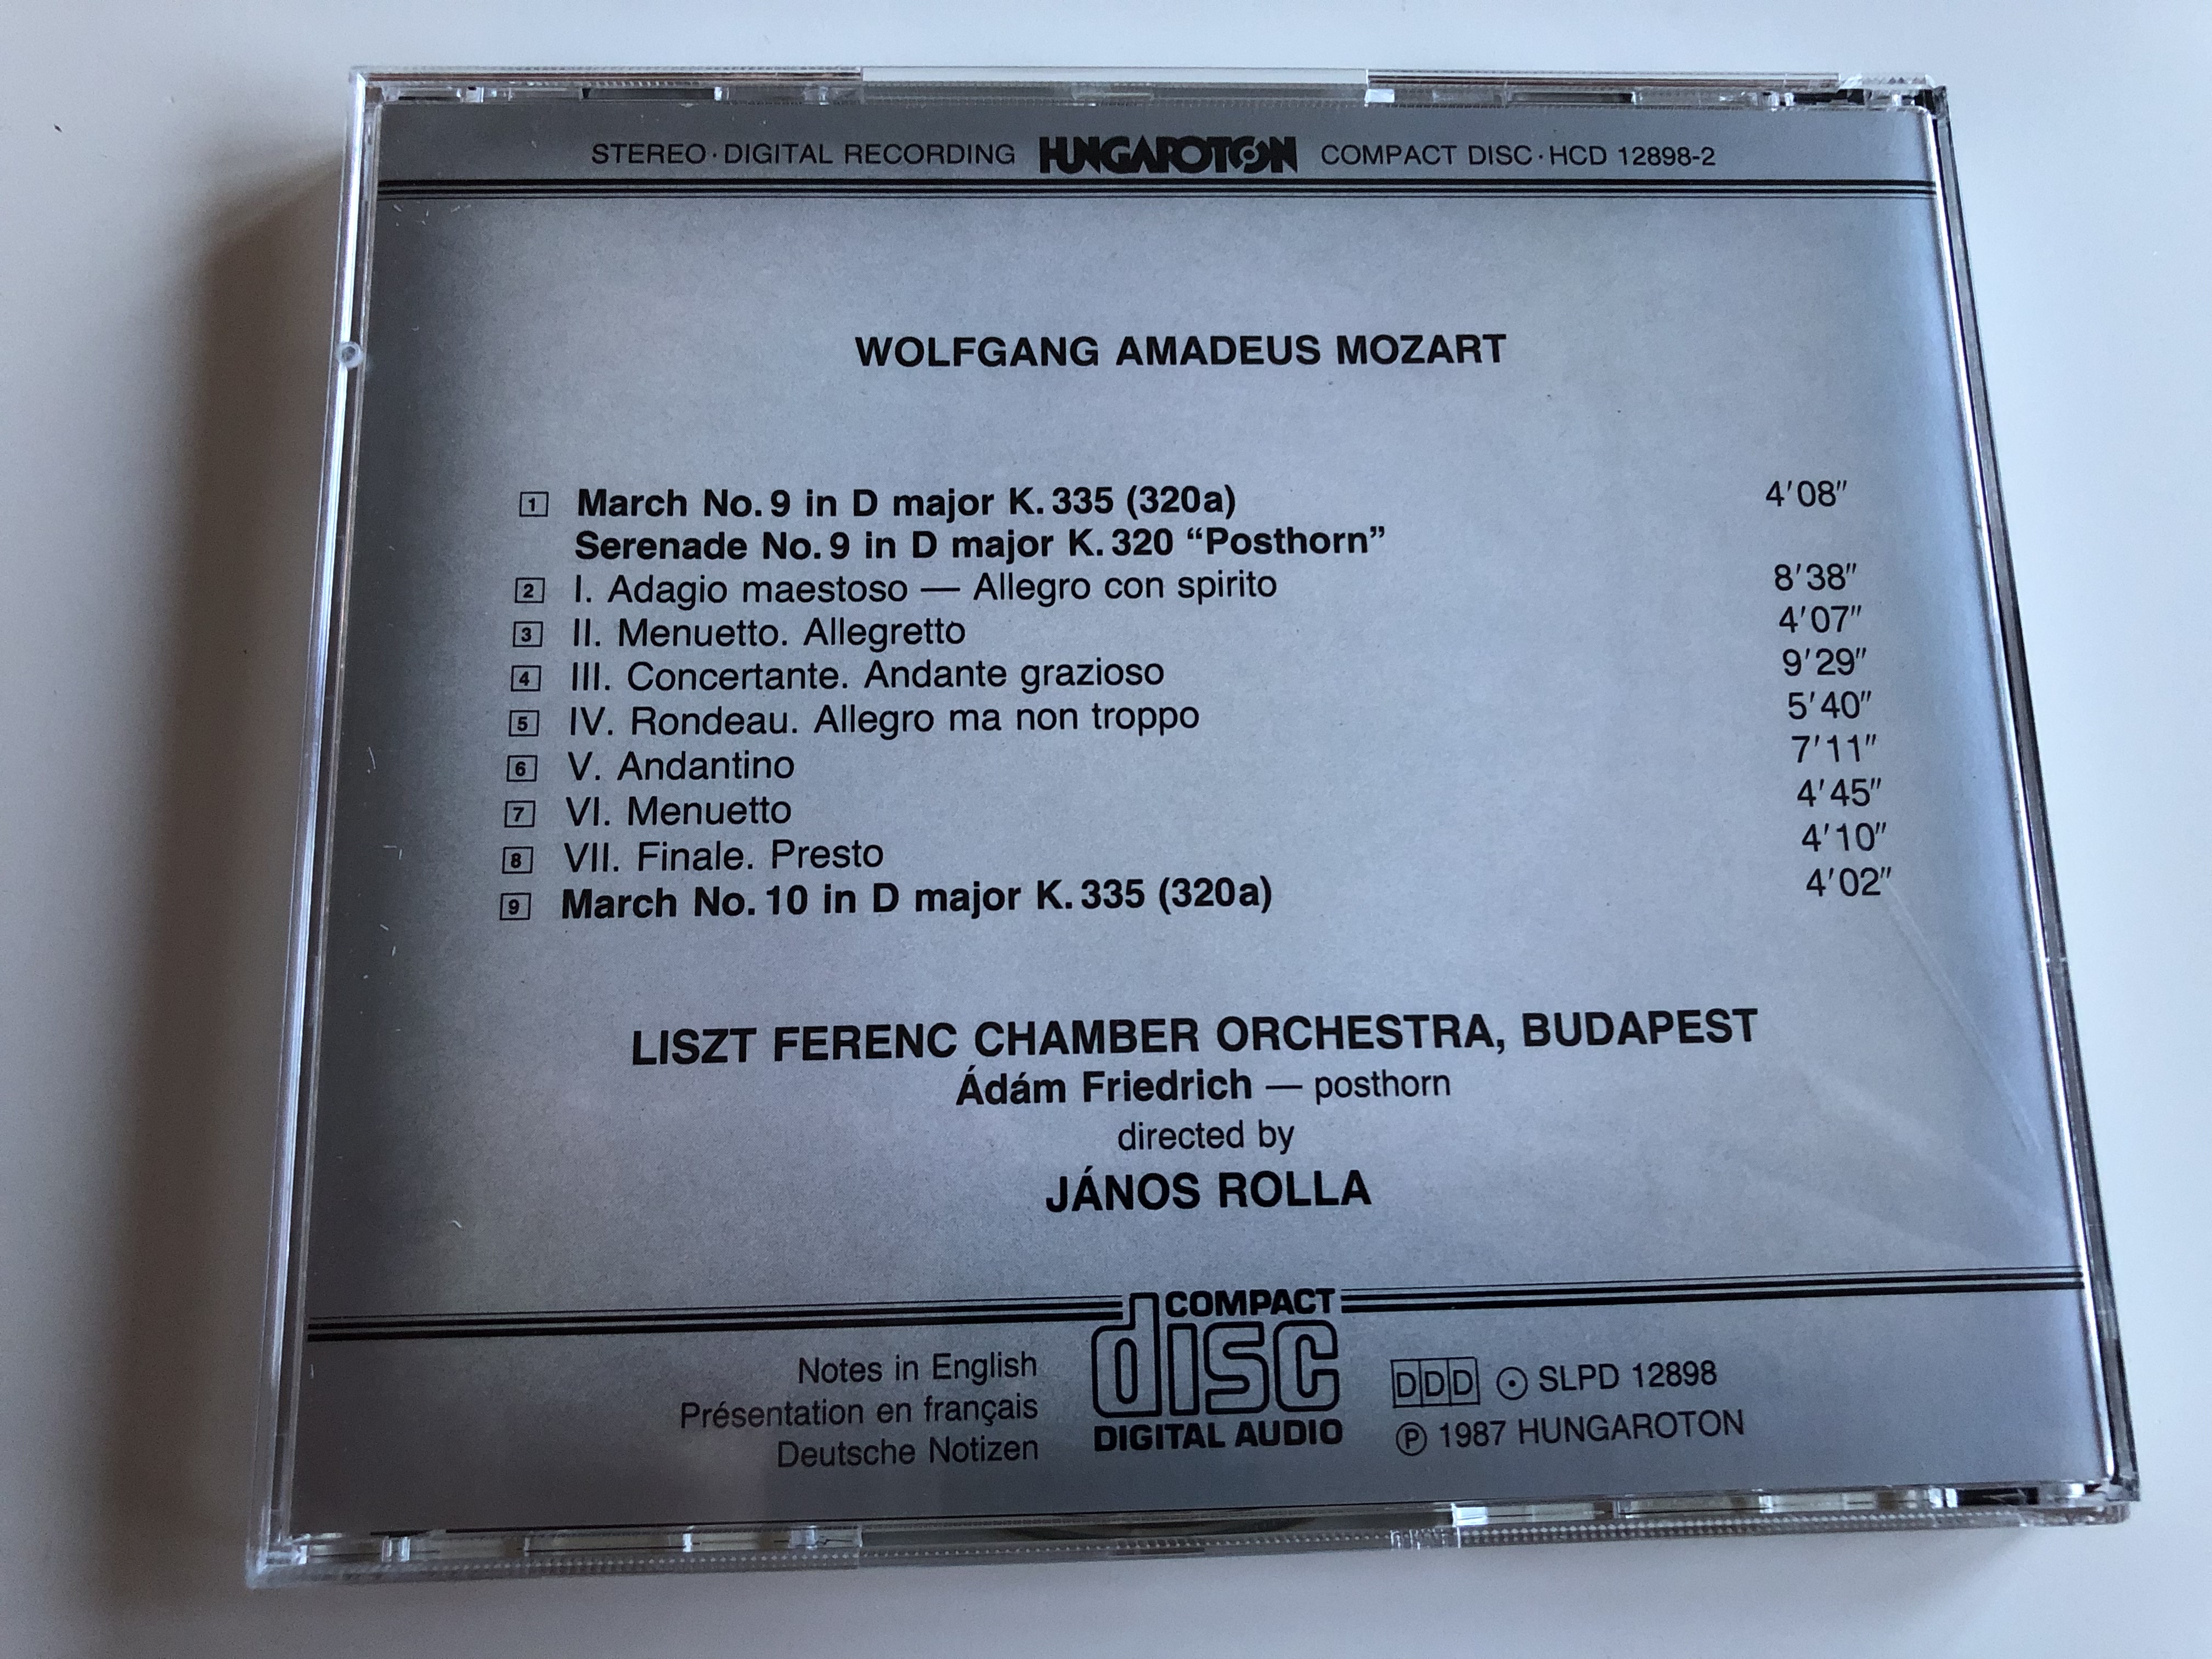 mozart-posthorn-serenade-no.9-in-d-major-marches-k.335-liszt-ferenc-chamber-orchestra-budapest-d-m-friedrich-j-nos-rolla-hungaroton-classic-audio-cd-1995-stereo-hcd-12898-2-7-.jpg